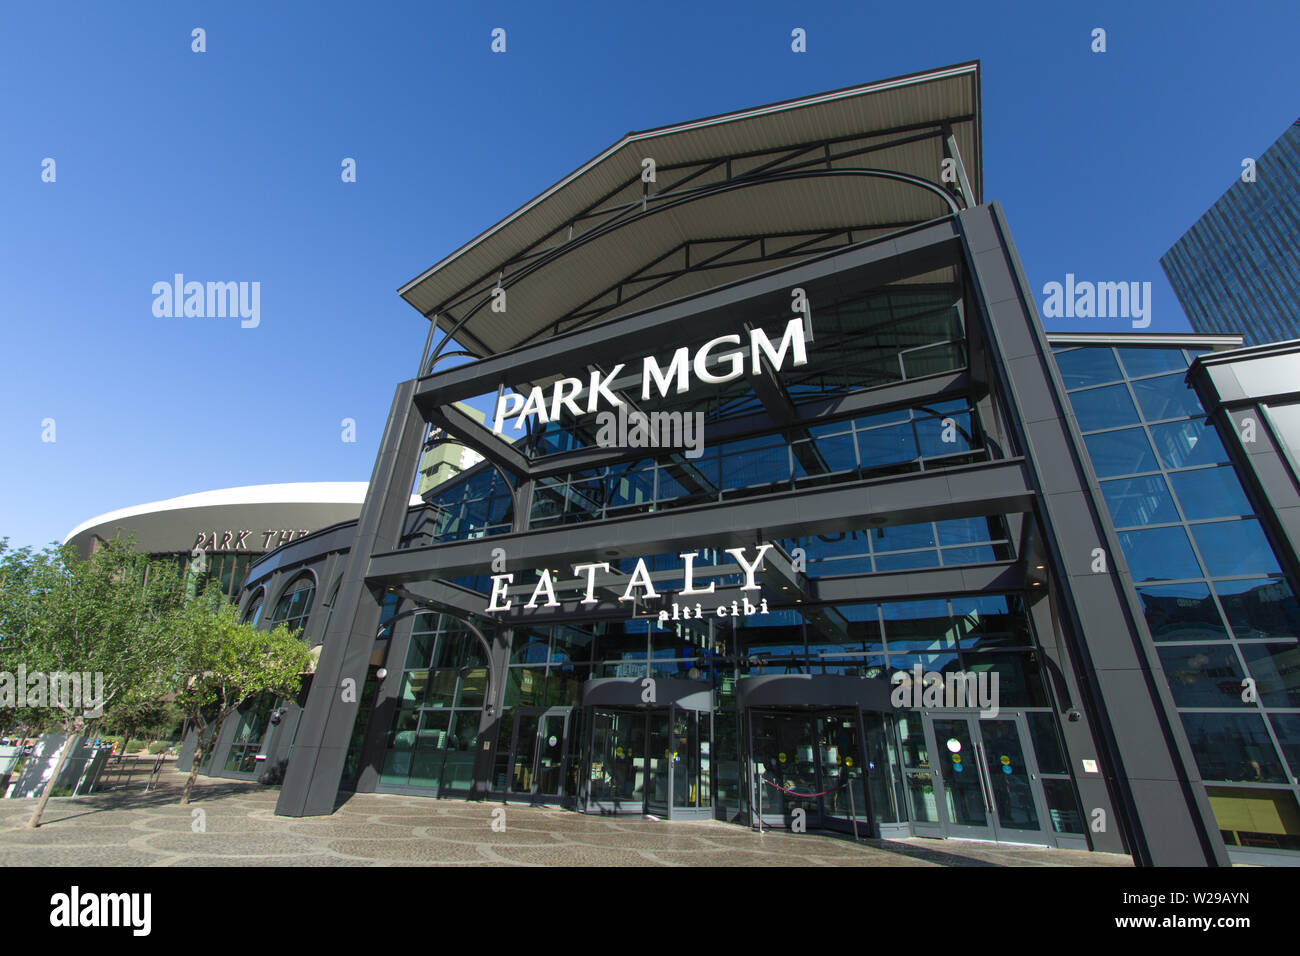 Las Vegas, Nevada, USA - May 6, 2019: Exterior of the Park MGM which features Eataly an Italian style food hall and market with Italian restaurants. Stock Photo